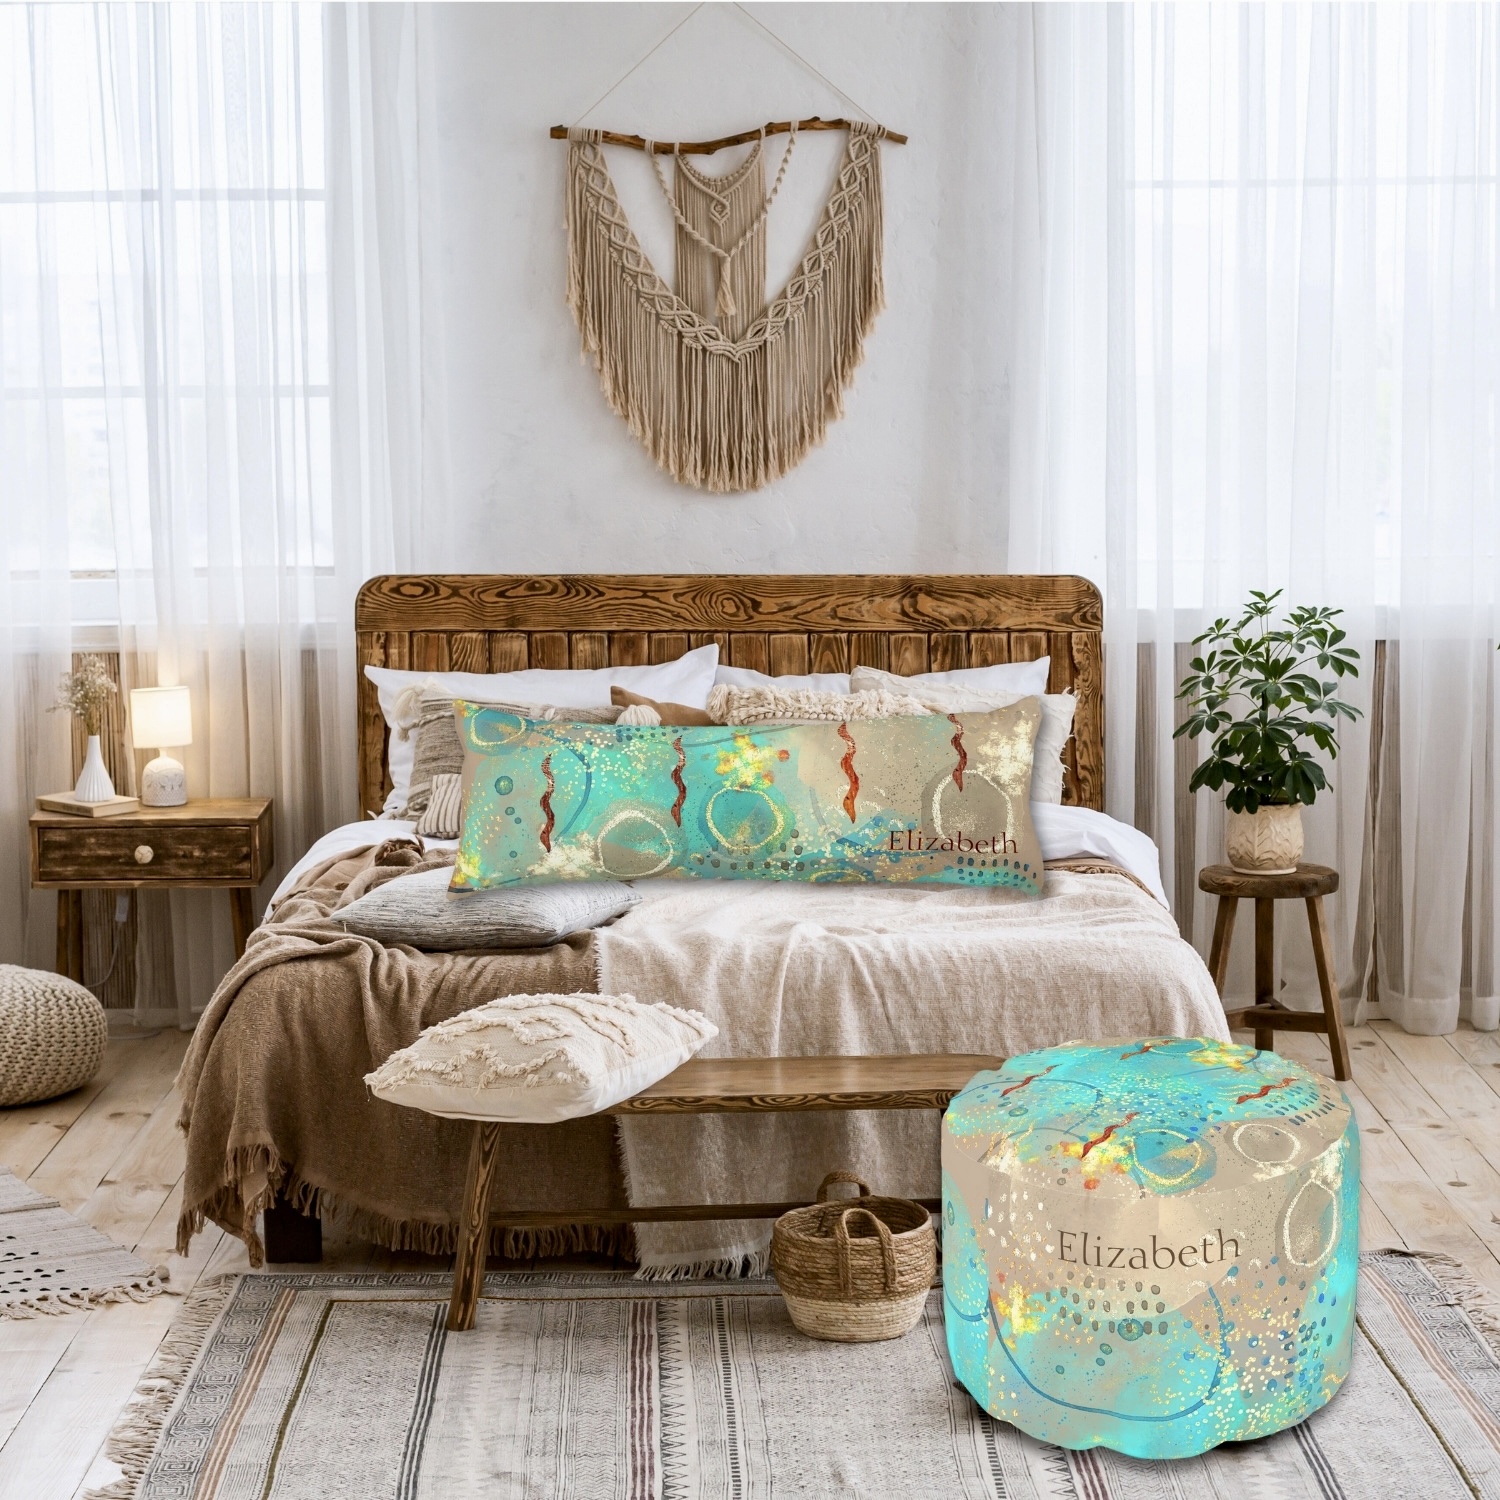 Create your sanctuary with our Turquoise Golden Ottoman Pouf, a symbol of comfort and tradition.